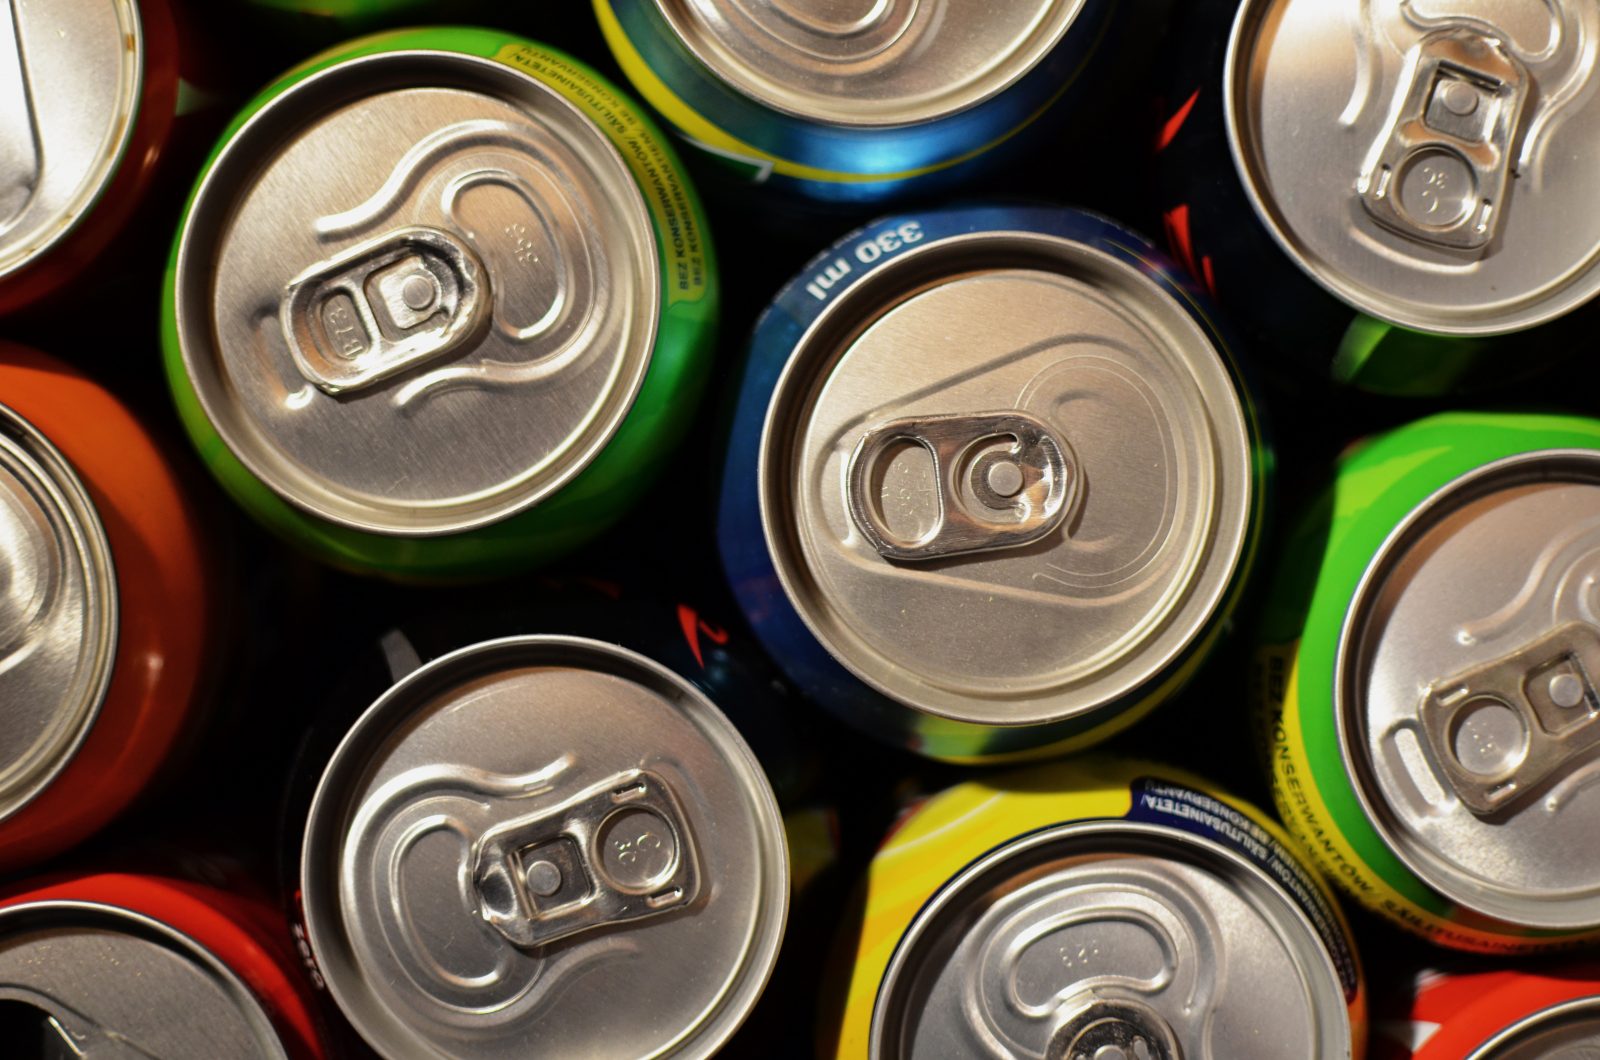 Dangers of synthetic caffeine